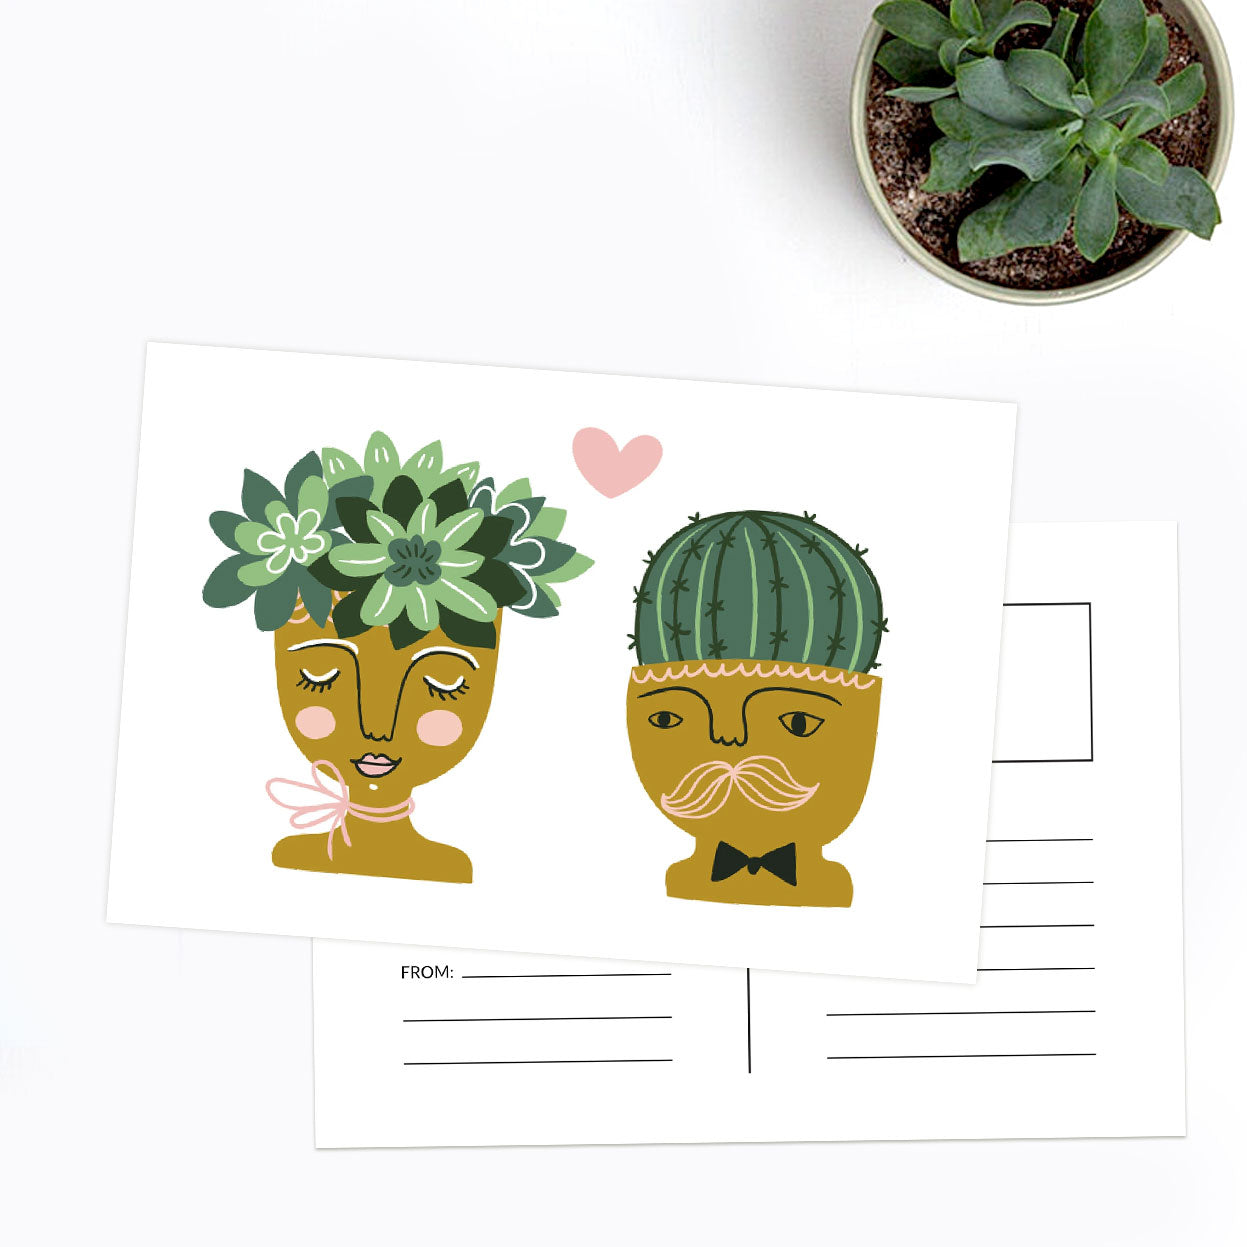 Succulent Valentine's Day Card, Valentine Cards, Valentine Card Ideas, Valentine's Greeting Card, Valentine's Day Cards Perfect for Your Sweetheart, Valentine's Day Cards for Sale, Succulent Love Card, Lovely Succulent Themed Valentine's Day Card, Succulent Gifts for Valentine's Day, Succulent Plant Gift Ideas For Valentine's Day, Best Valentine Gifts 2023, Unique DIY Valentine's Day Gifts For That Special Someone